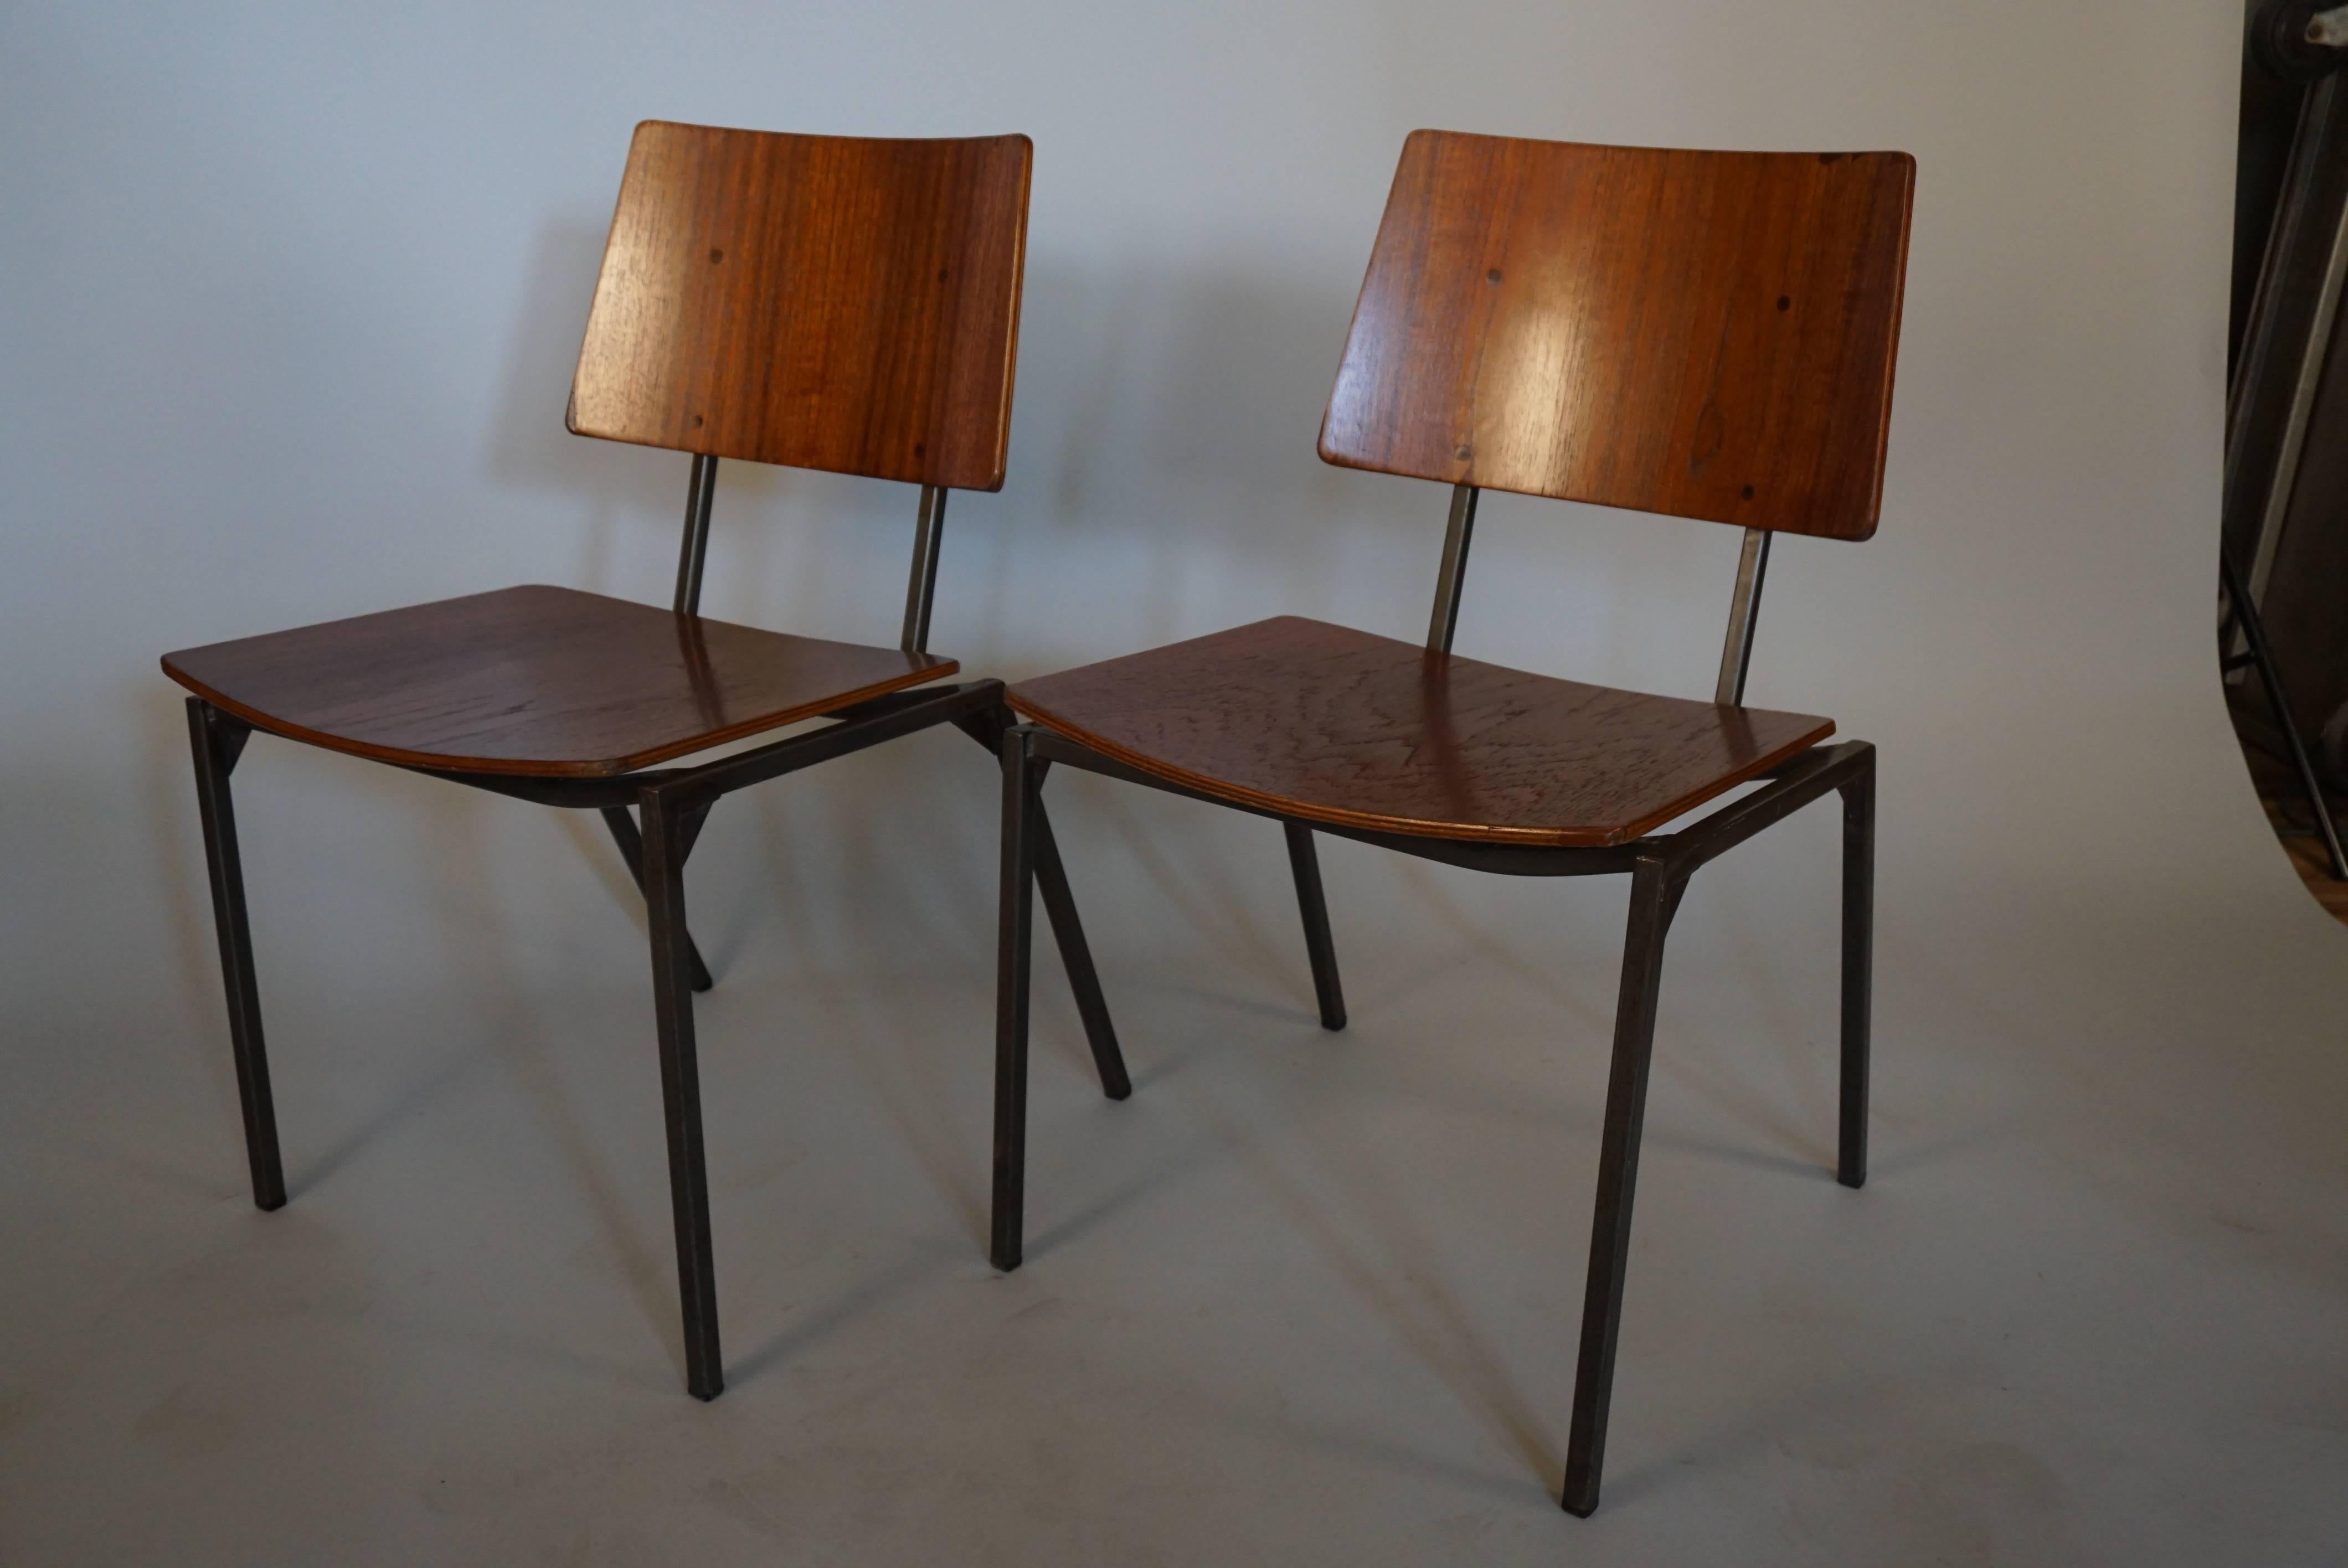 A utilitarian design with great profile and easy seating
manufactured in Copenhagen in the 1970s.